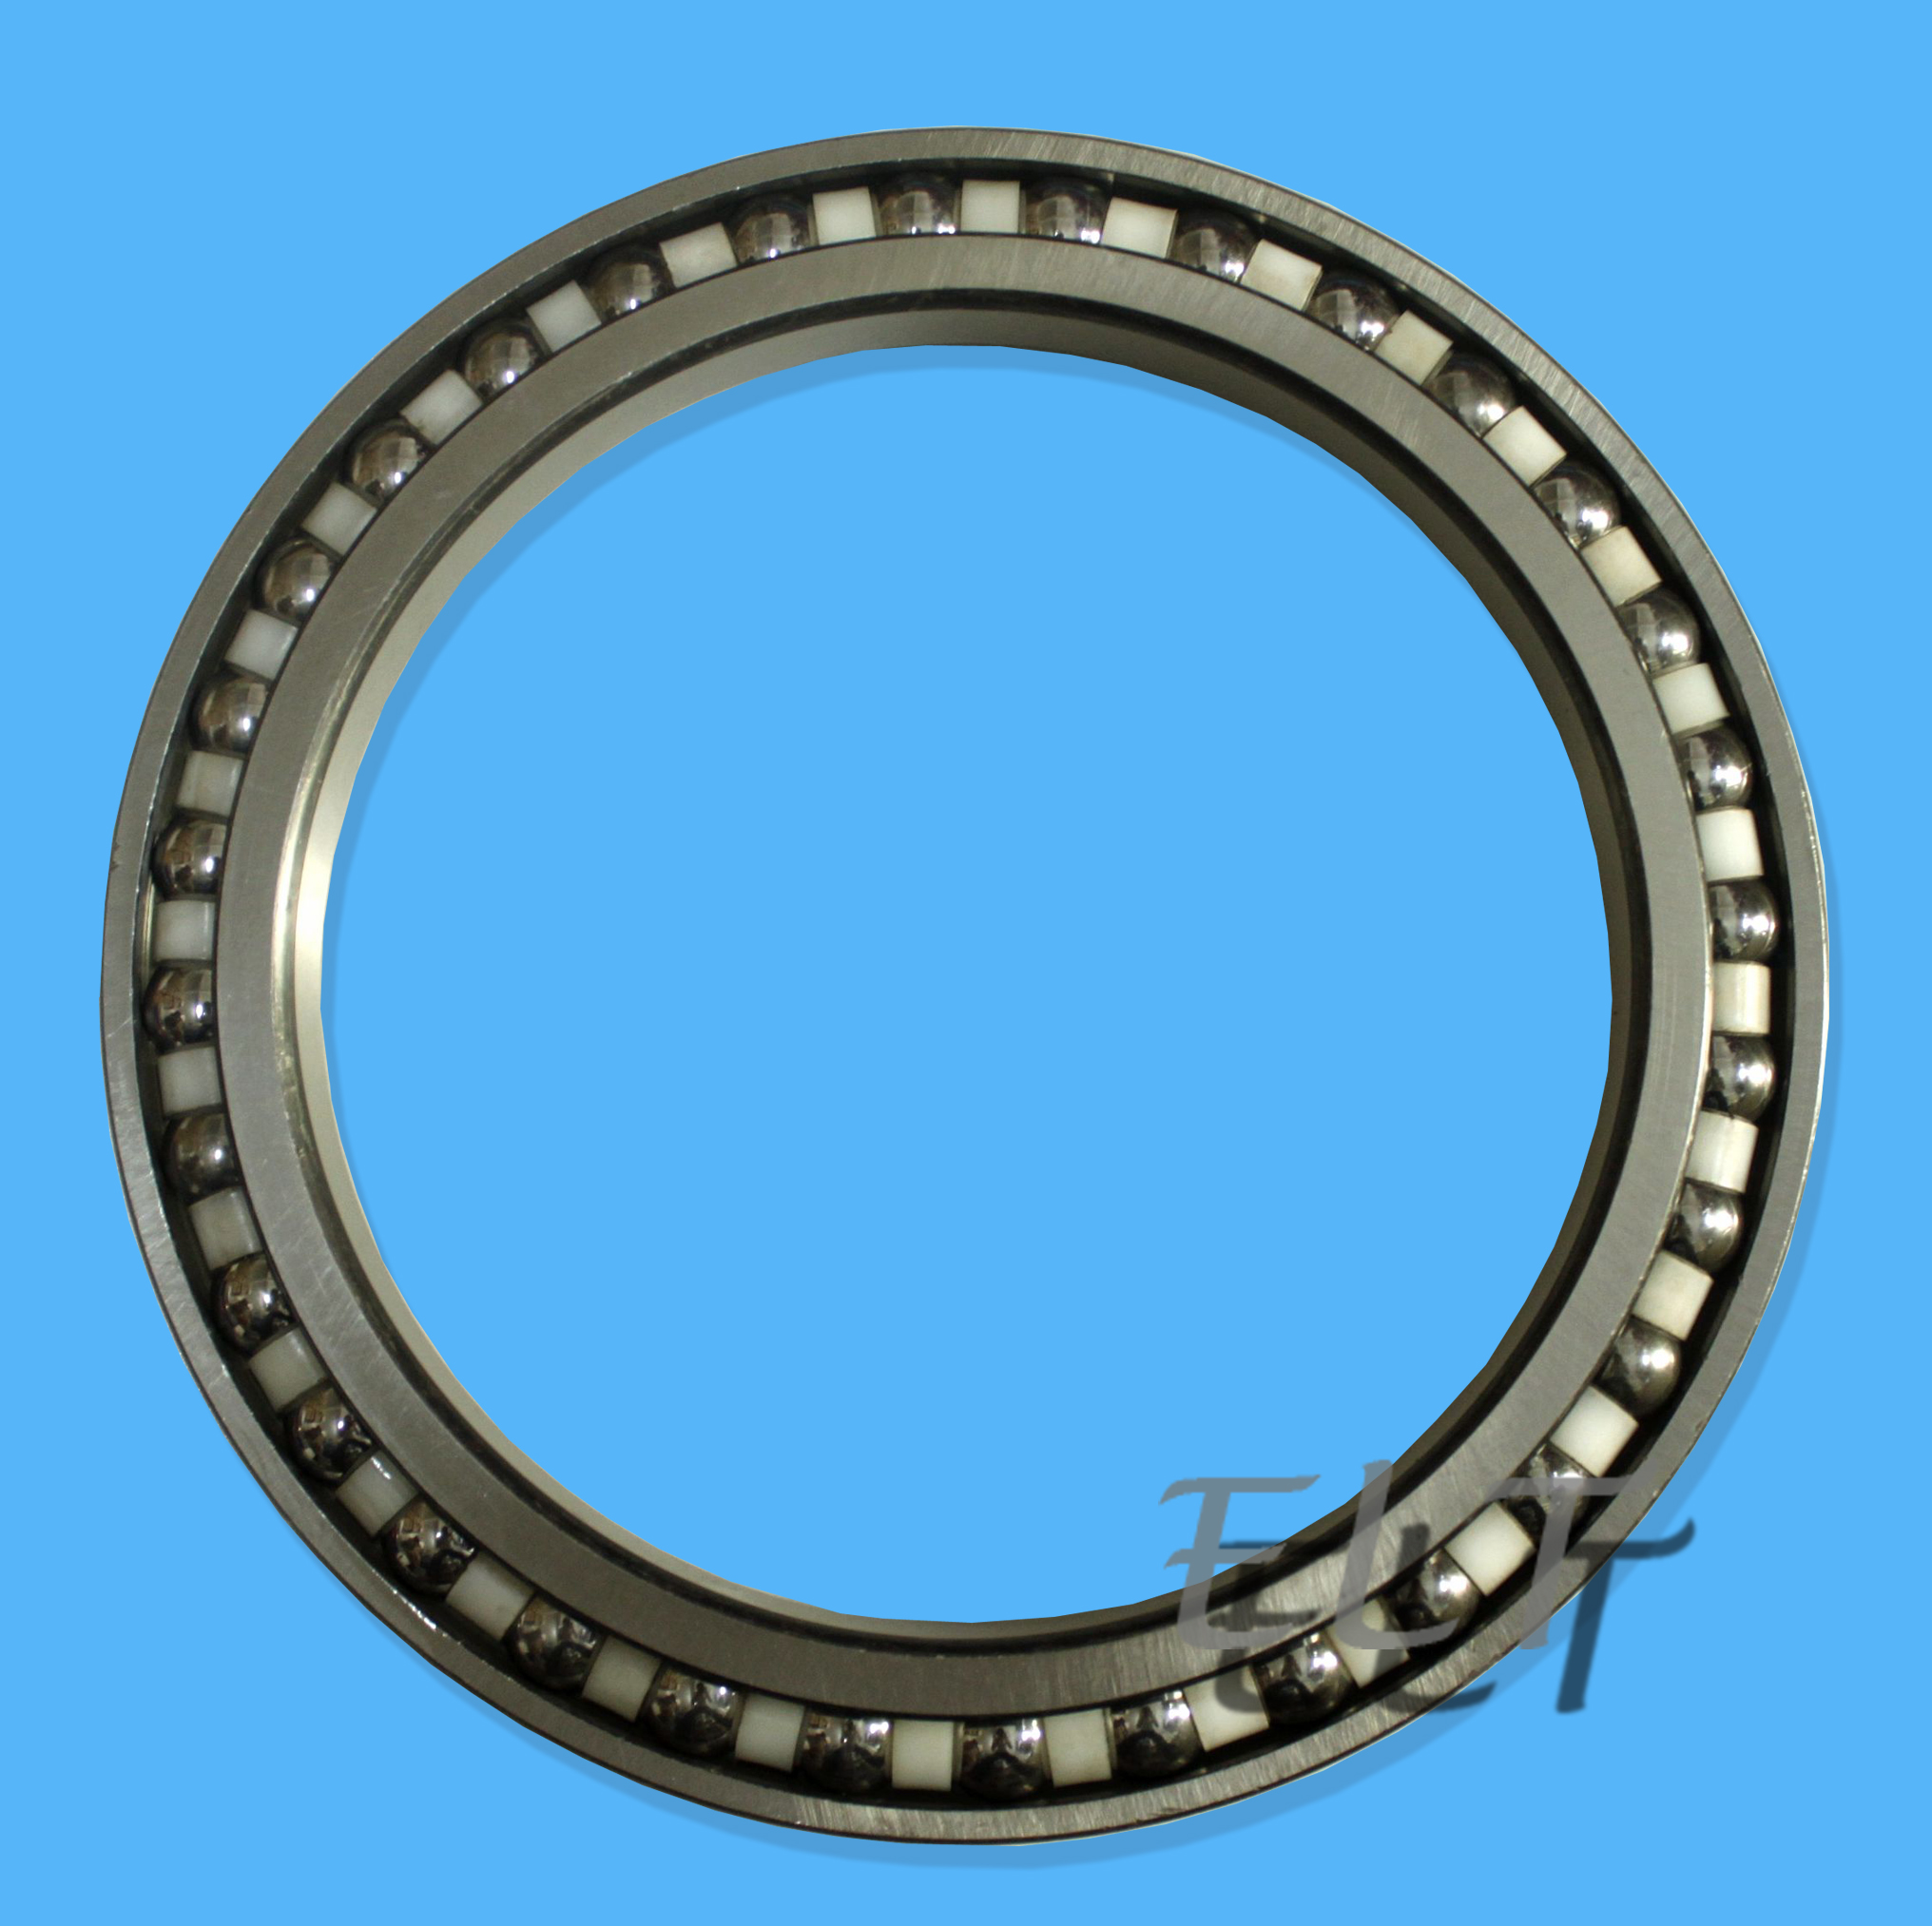 Image of Final Drive Main Bearing AC5033 BA250-4A Fit HD800-7 DH225-7 Travel Reduction